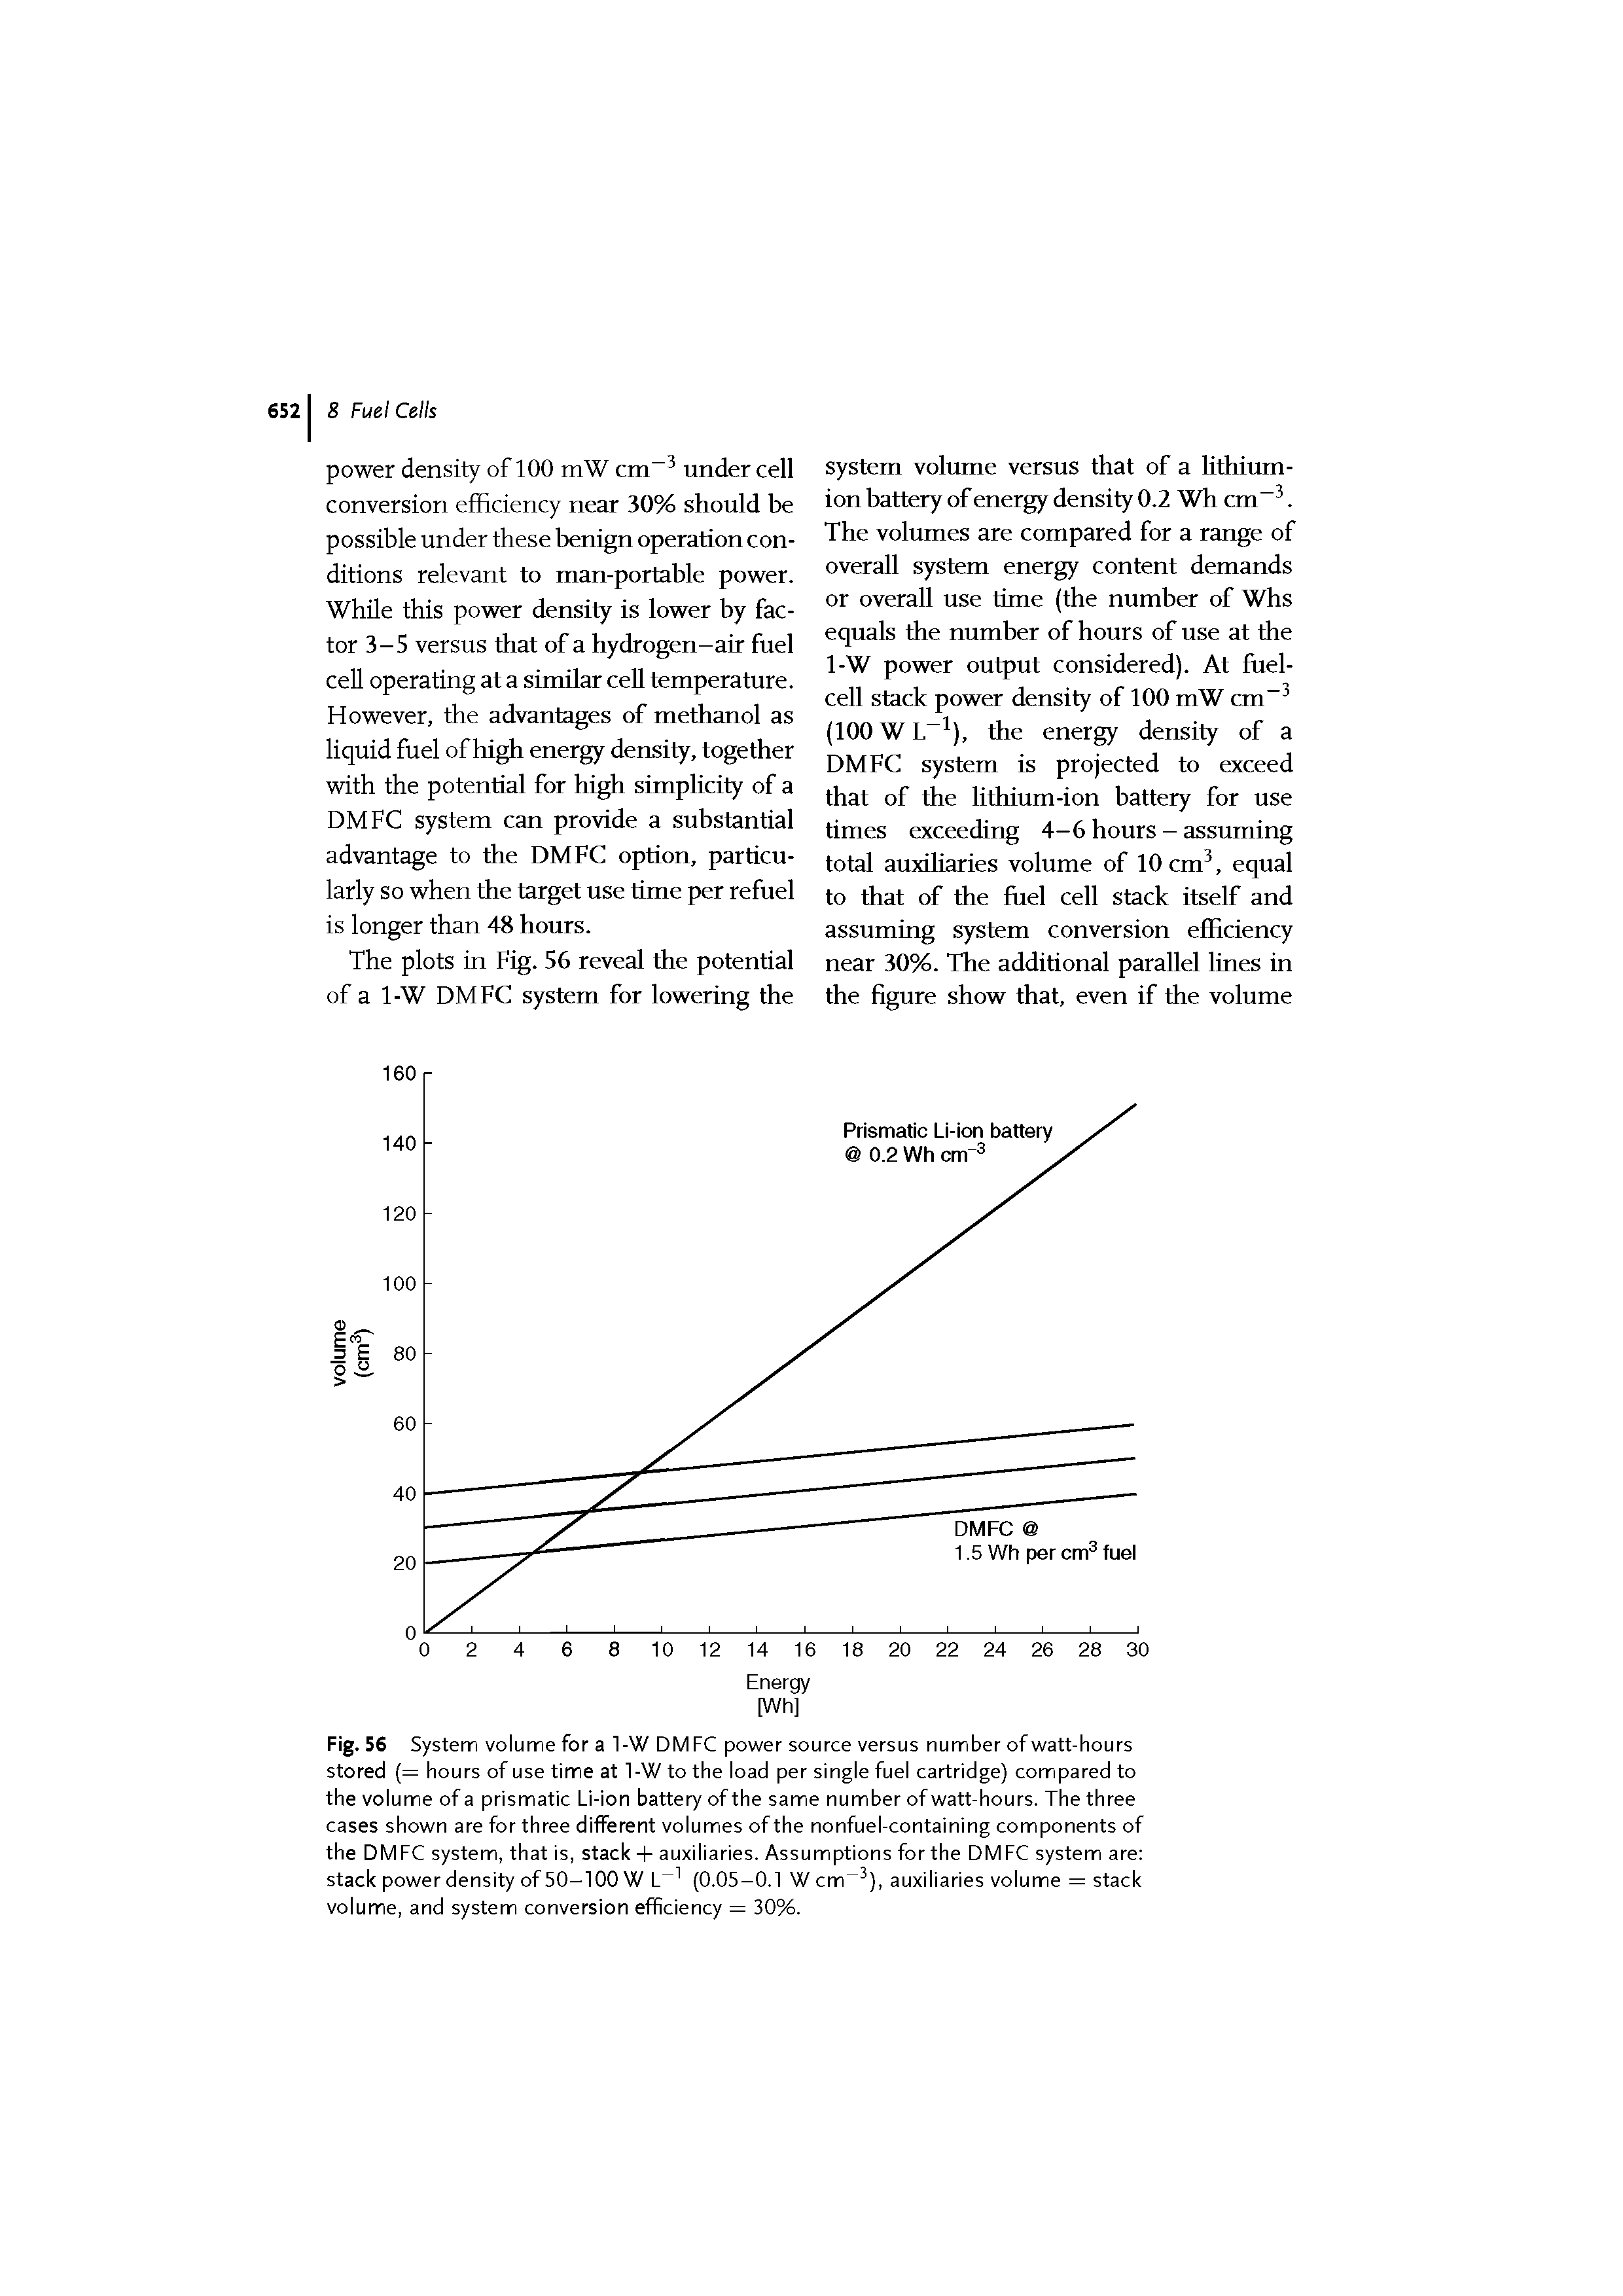 Fig. 56 System volume for a 1-W DMFC power source versus number of watt-hours stored (= hours of use time at 1-W to the load per single fuel cartridge) compared to the volume of a prismatic Li-ion battery of the same number of watt-hours. The three cases shown are for three different volumes of the nonfuel-containing components of the DMFC system, that is, stack + auxiliaries. Assumptions for the DMFC system are stack power density of 50-100 W L-1 (0.05-0.1 W cm-3), auxiliaries volume = stack volume, and system conversion efficiency = 30%.